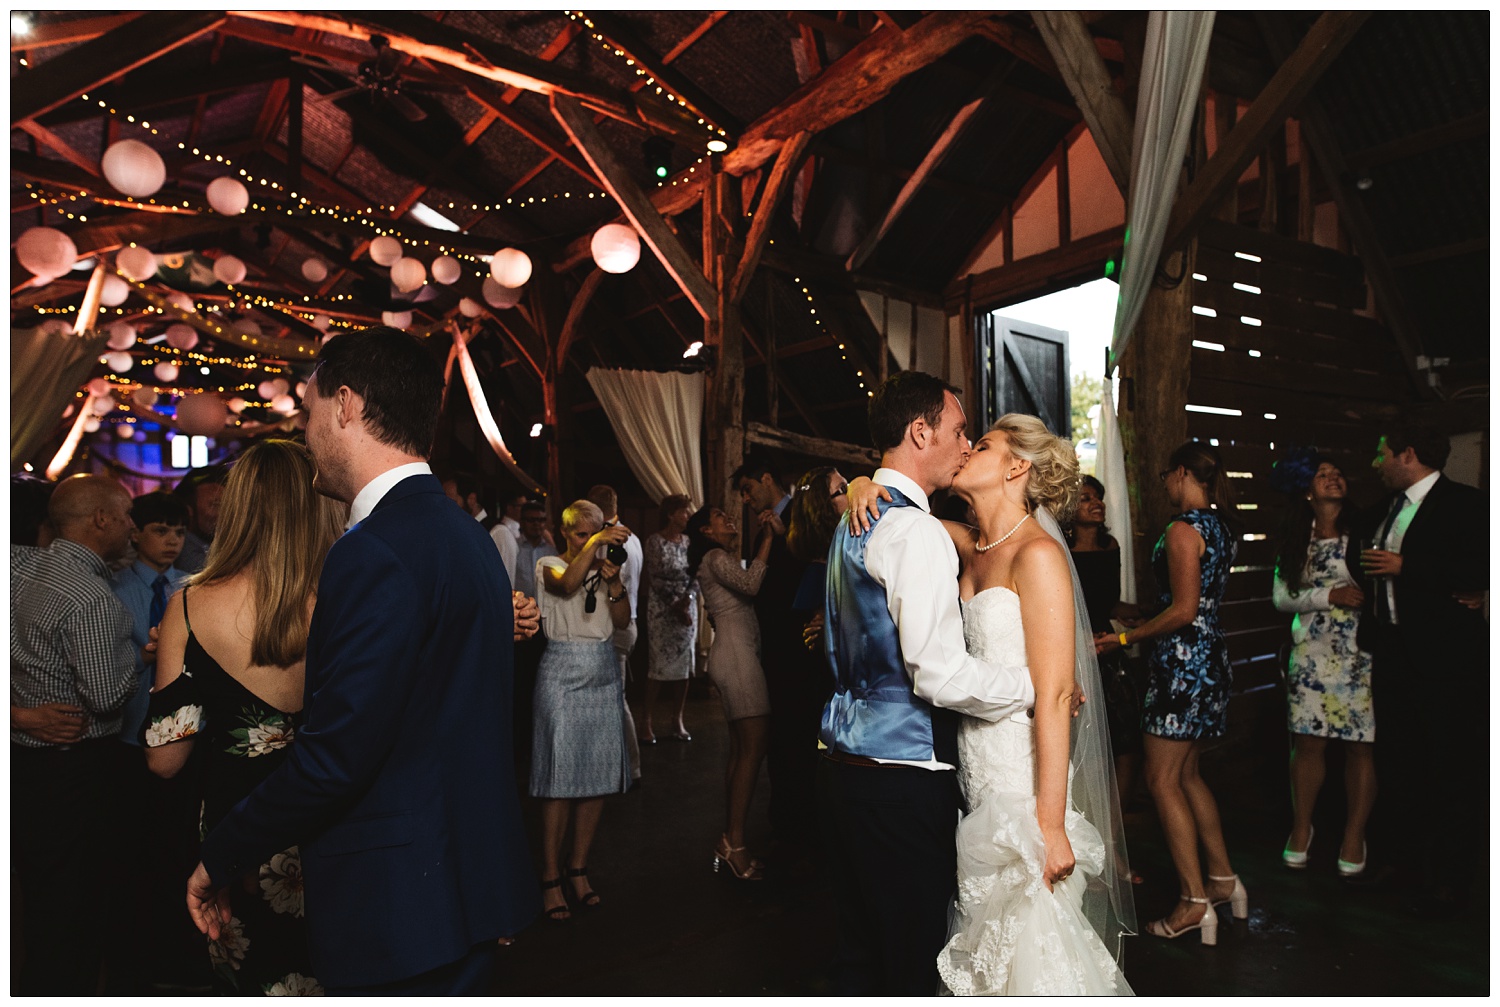 Bride and groom kissing on the dance floor surrounded by guests in Alpheton Hall Barns.